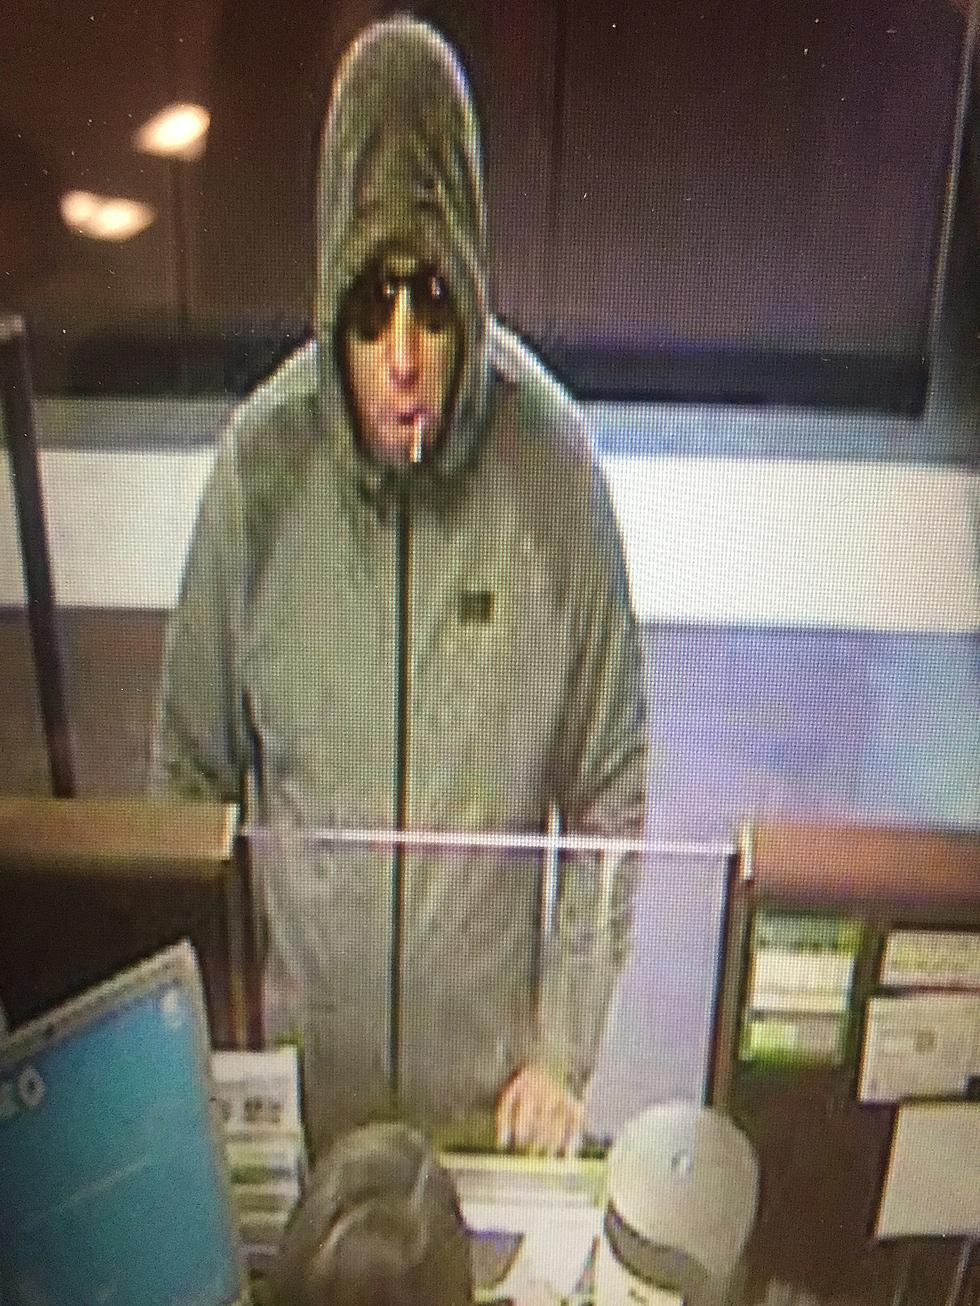 Manahawkin bank robbery suspect remains on the run